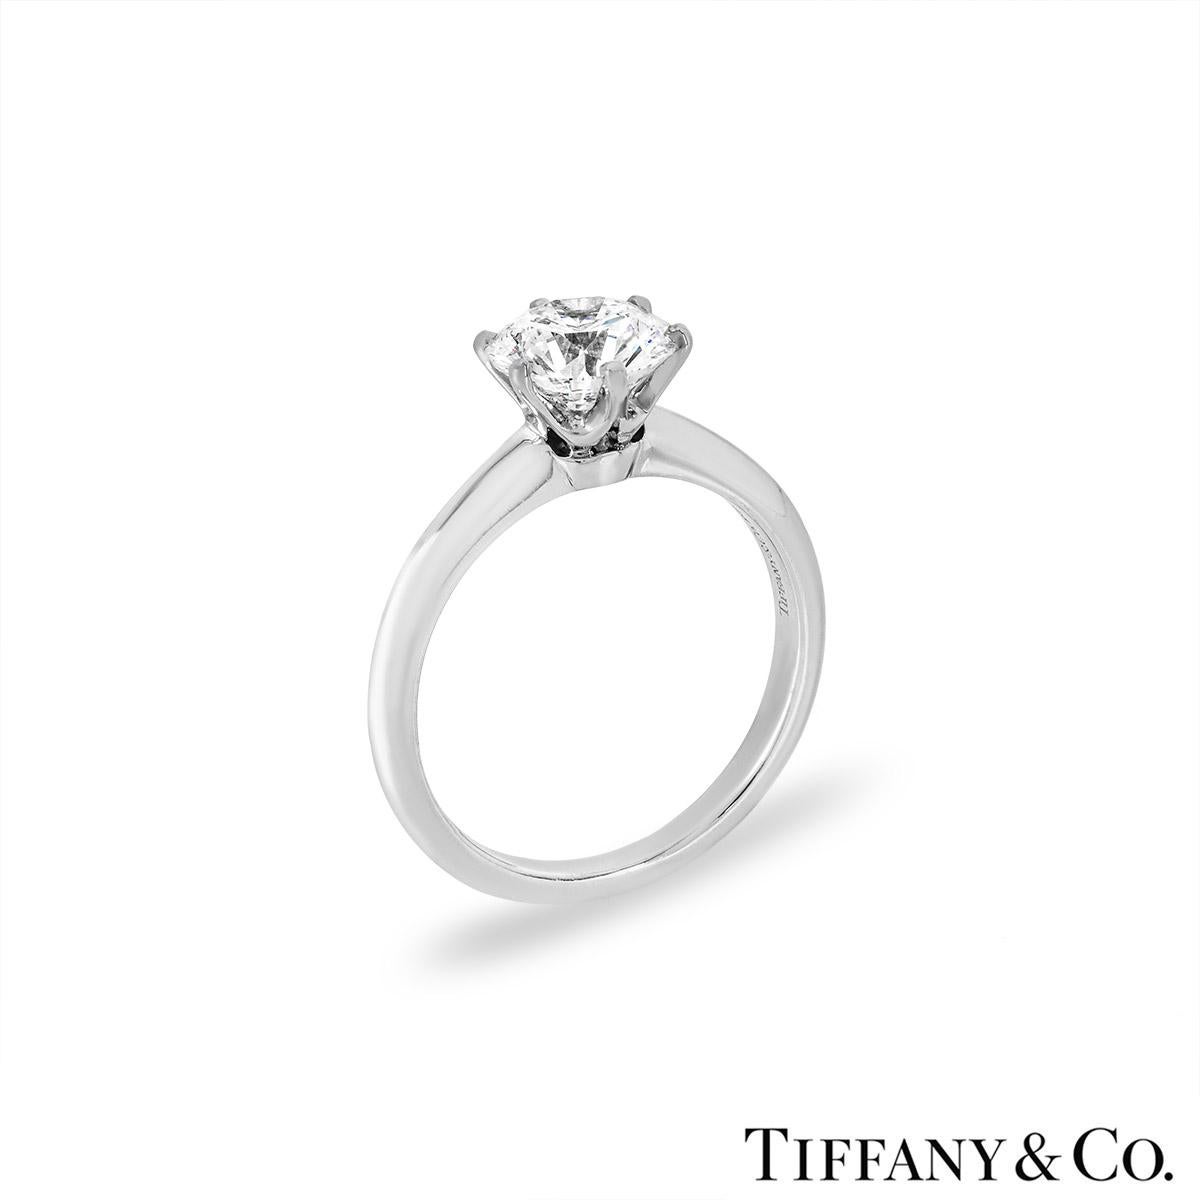 A beautiful Tiffany & Co. diamond engagement ring from The Tiffany Setting Band collection. The ring comprises of a round brilliant cut diamond in a prong setting with a weight of 1.53ct, E colour and VVS2 clarity. The ring is currently a US size